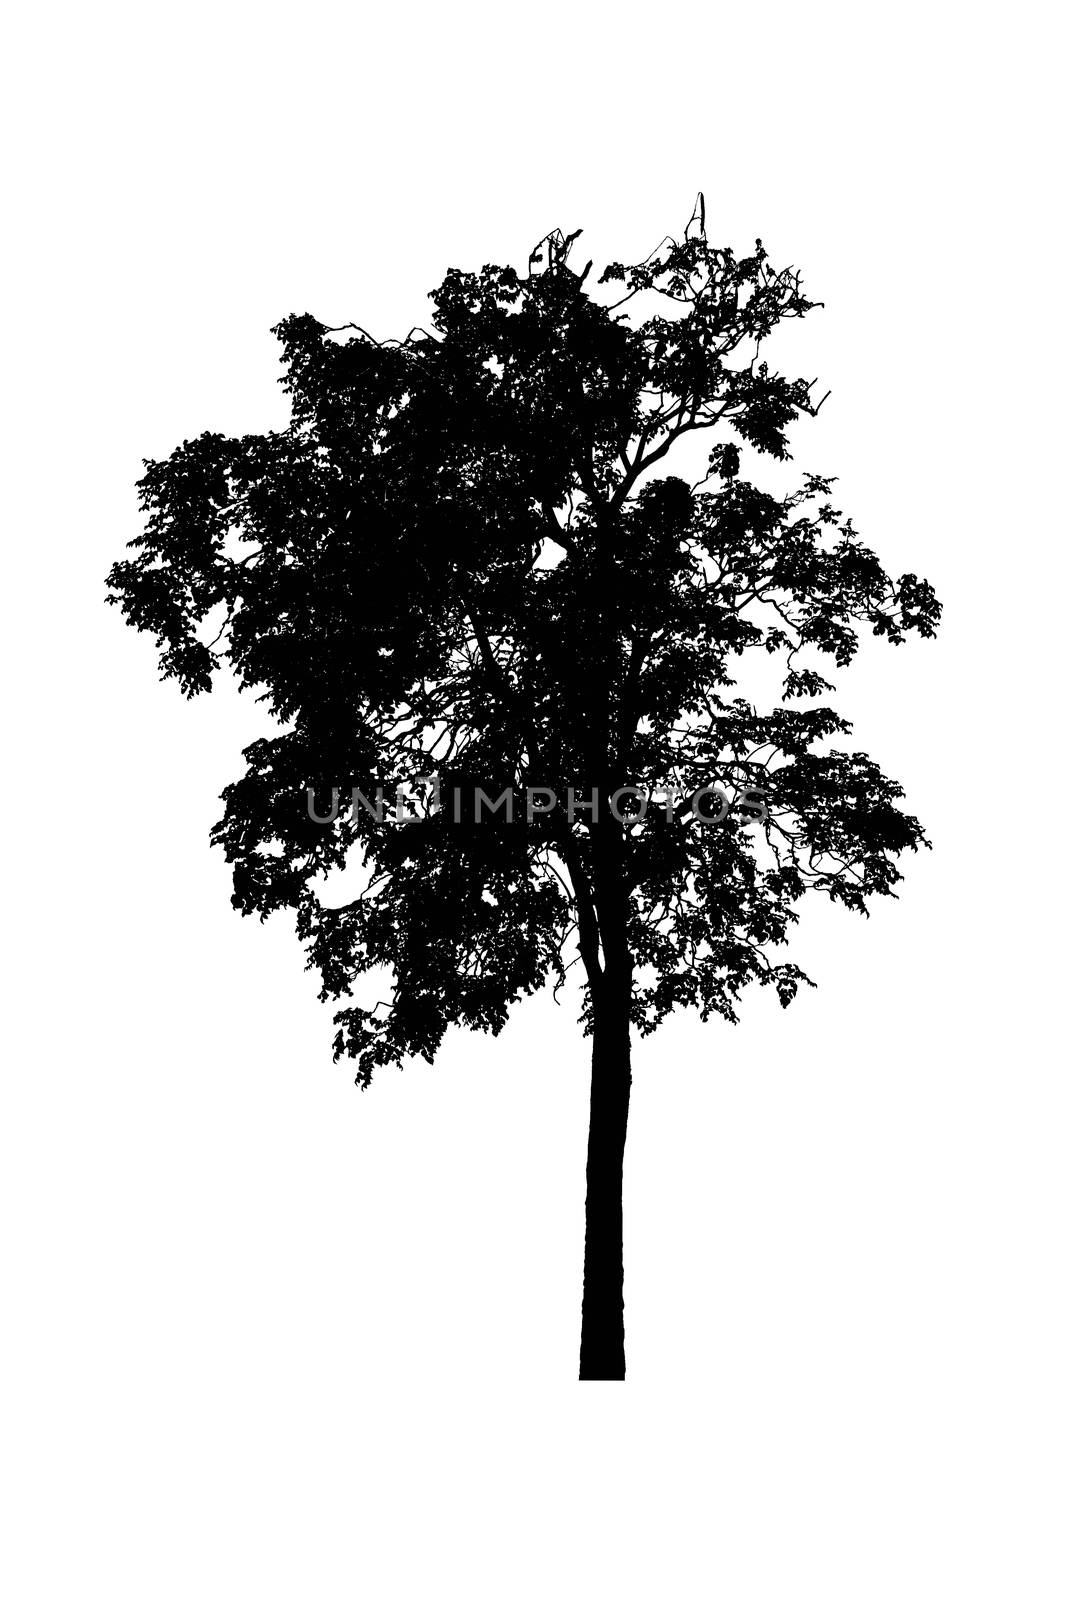 tree silhouettes beautiful isolated on white background